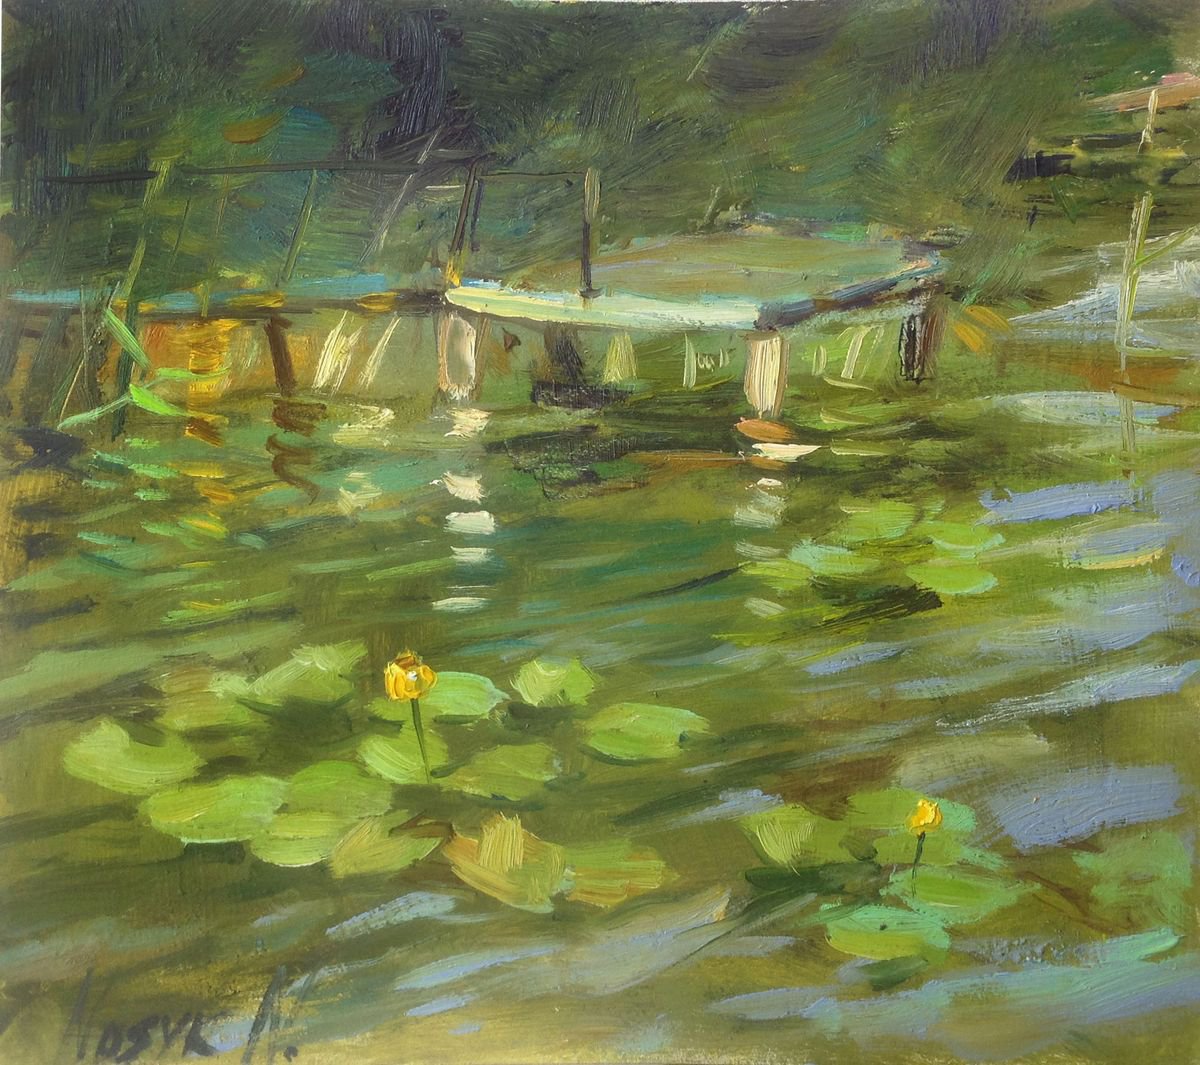 Water lily and fishing bridge by Nataliia Nosyk